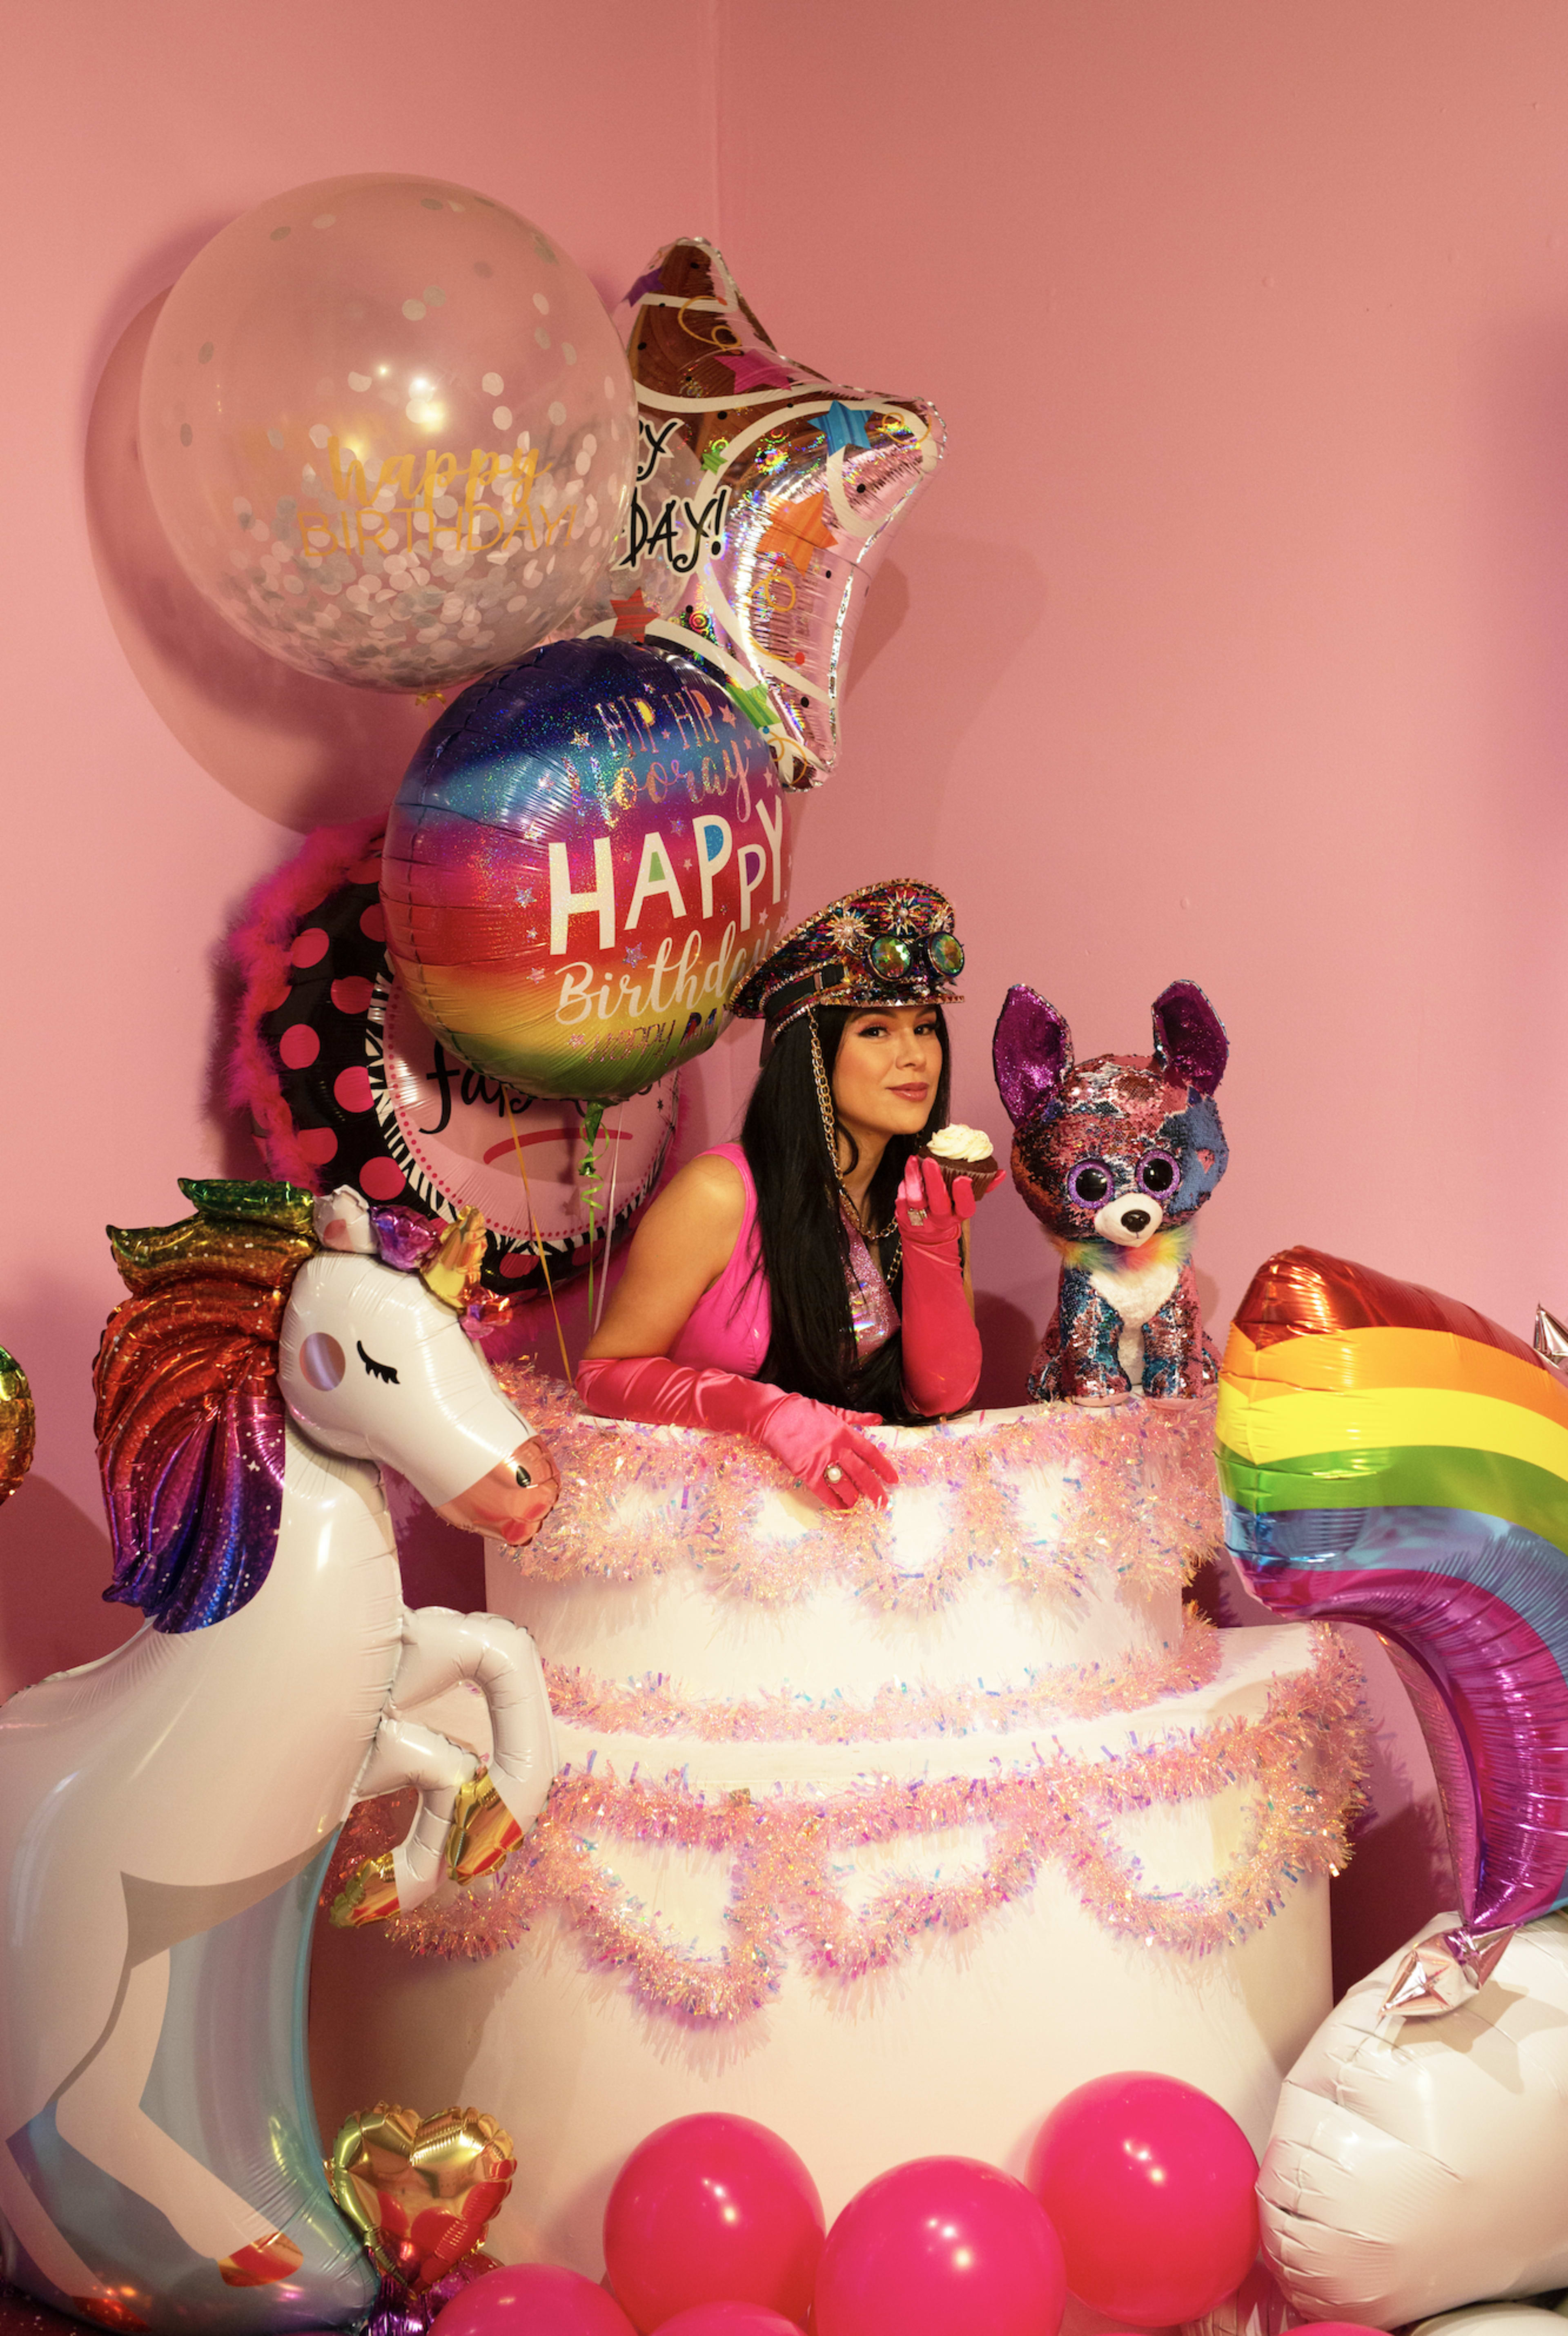 A unicorn-themed birthday photo shoot with a woman sitting on top of a cake surrounded by balloons.